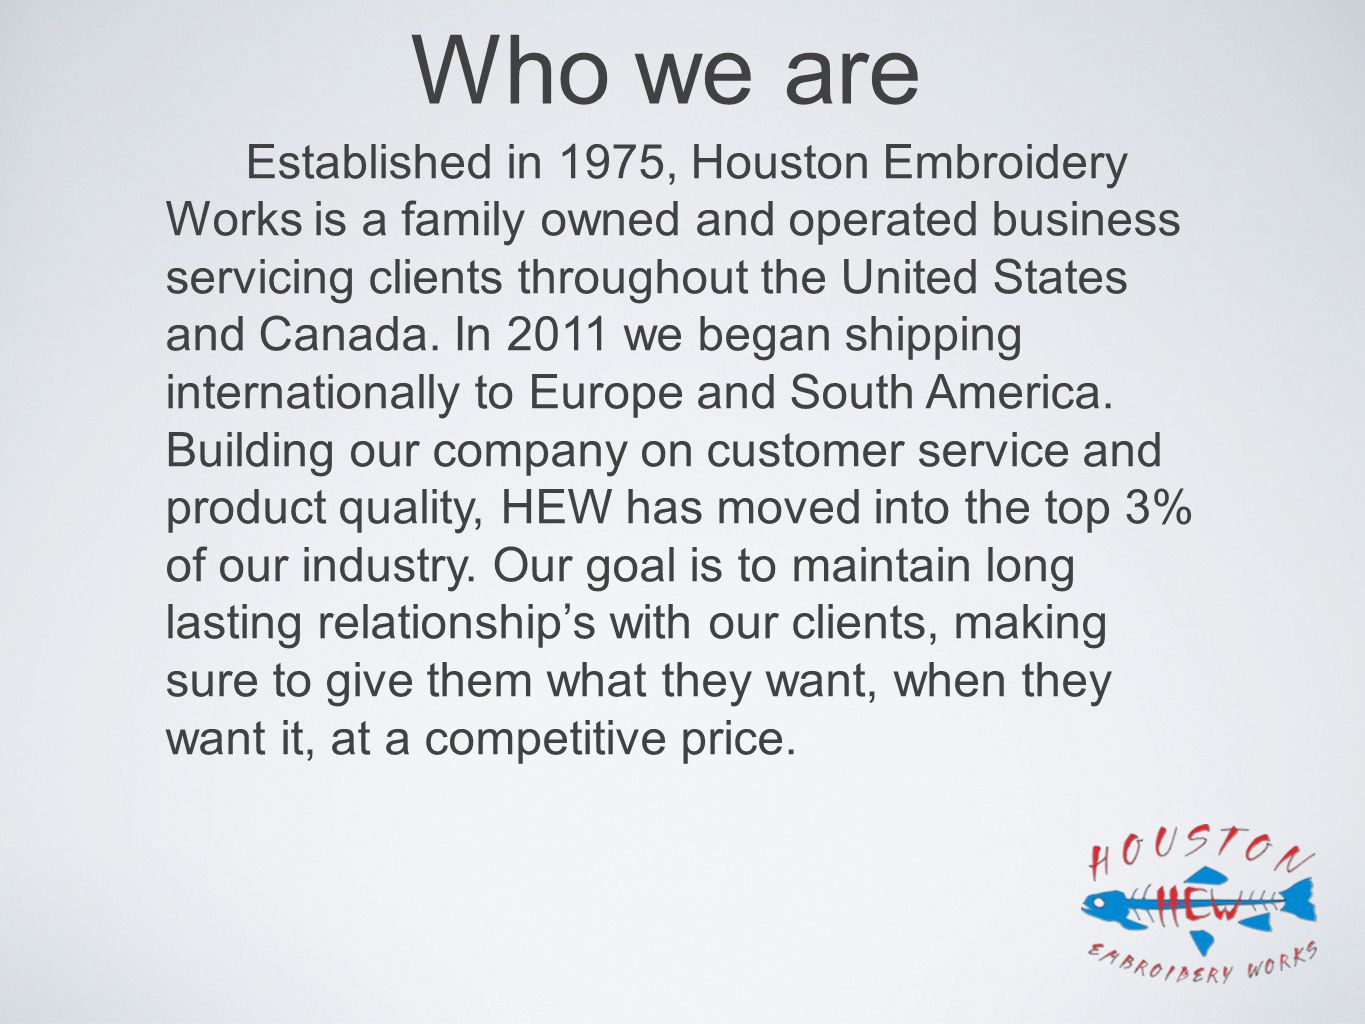 Established in 1975, Houston Embroidery Works is a family owned and operated business servicing clients throughout the United States and Canada.